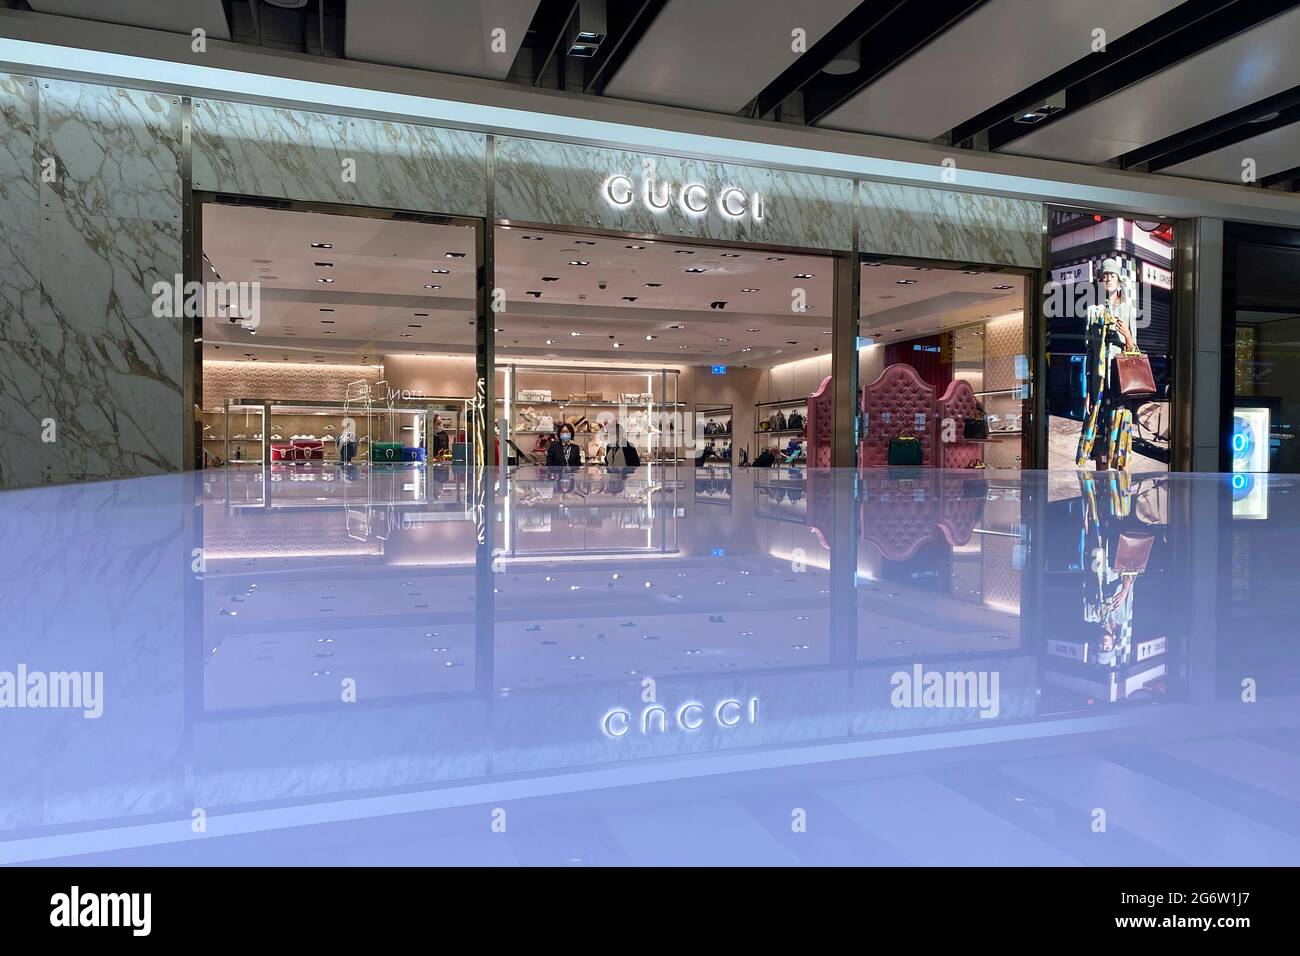 Gucci Store London High Resolution Stock Photography and Images - Alamy